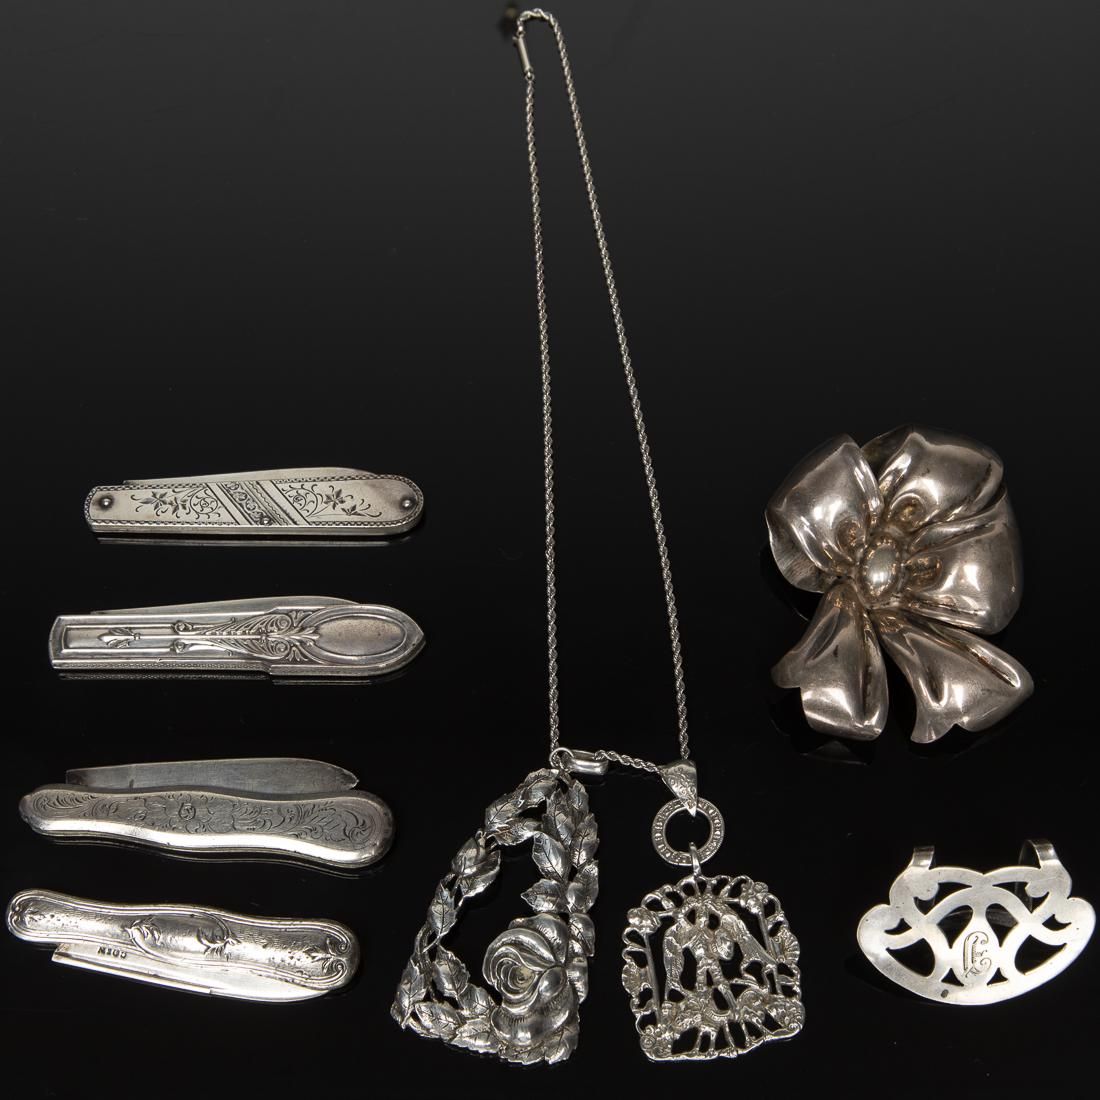 GROUP OF SILVER JEWELRY AND 4 POCKET 3d3159